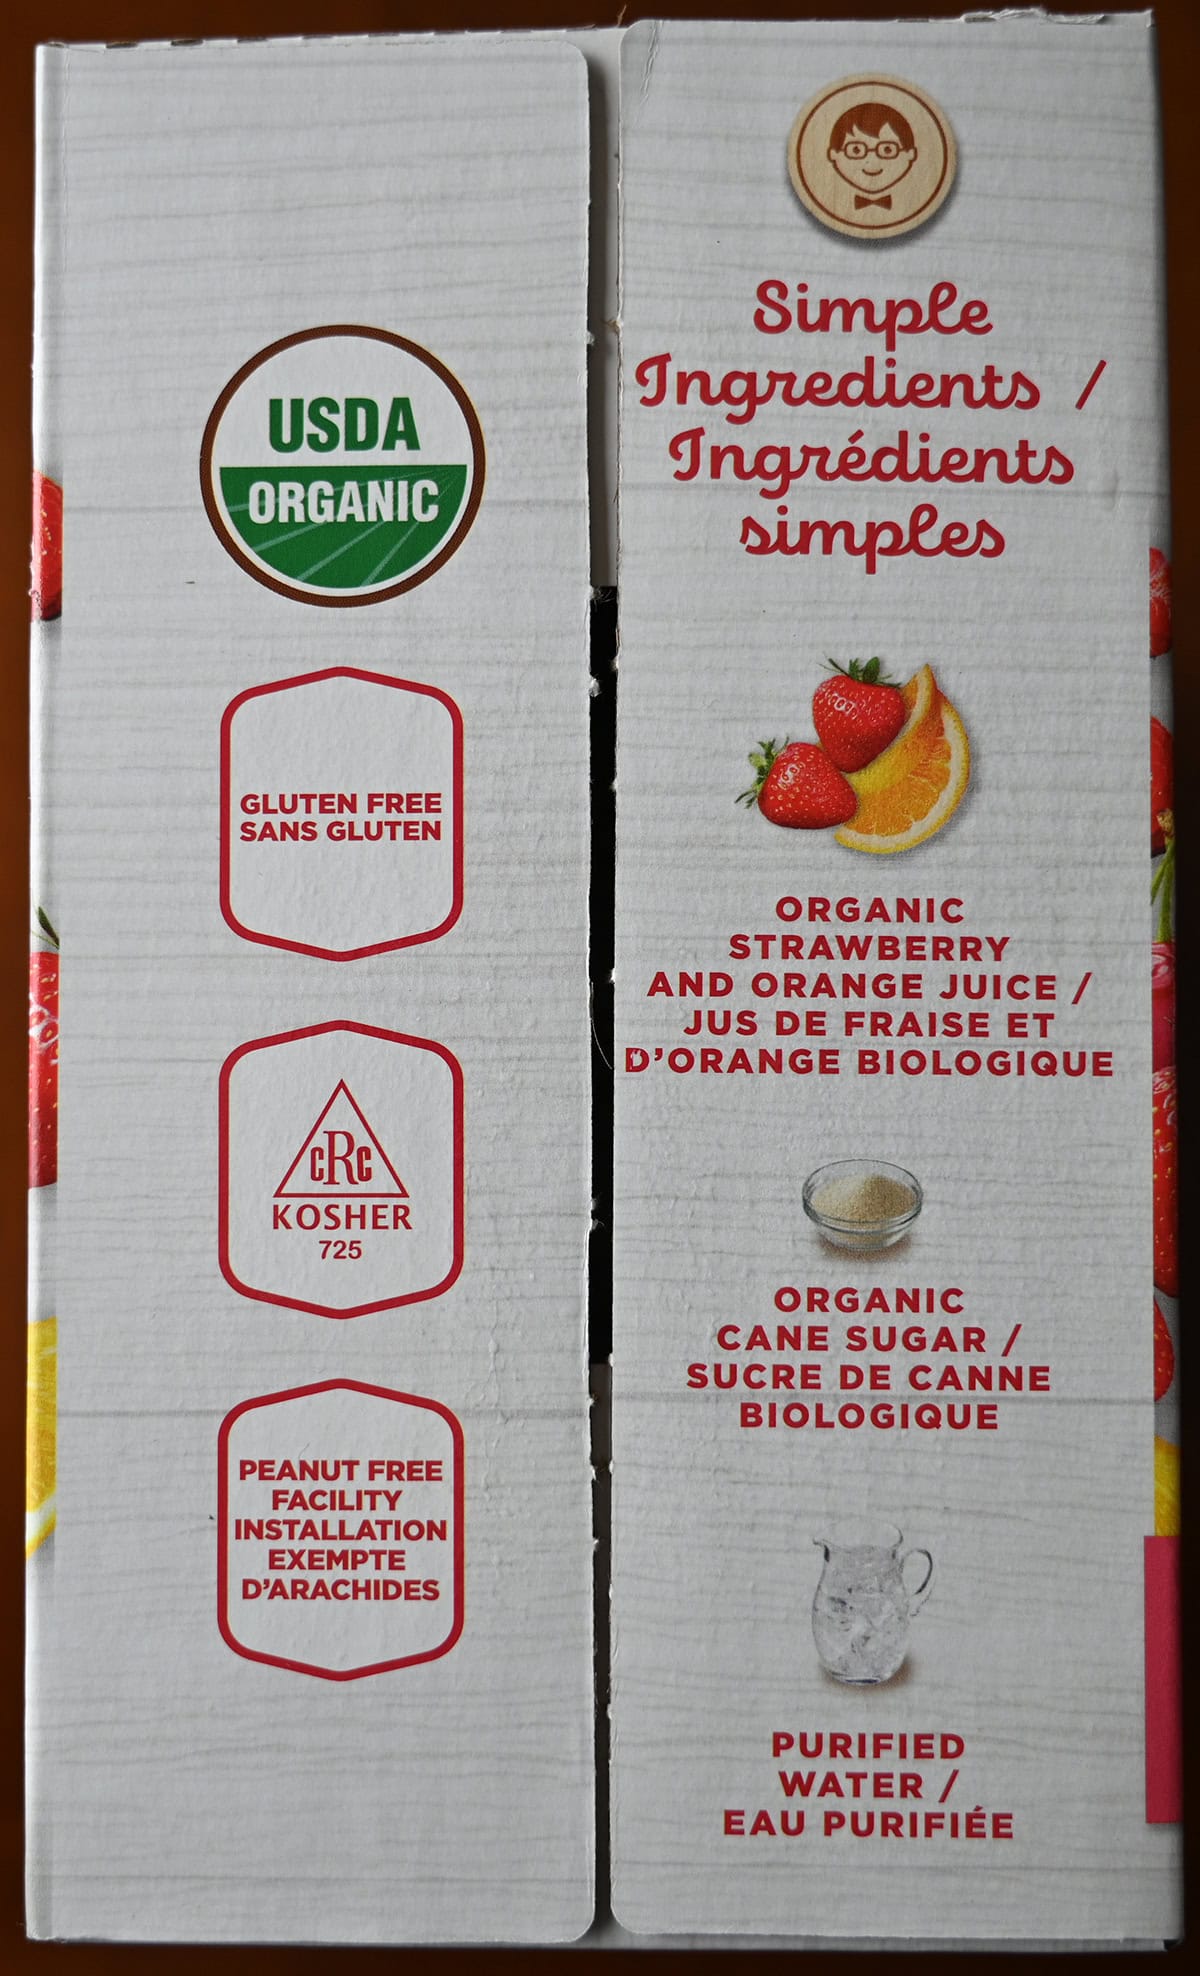 Image of the side of the box of Jonny pops showing they're made in a peanut-free facility, are kosher and gluten-free.